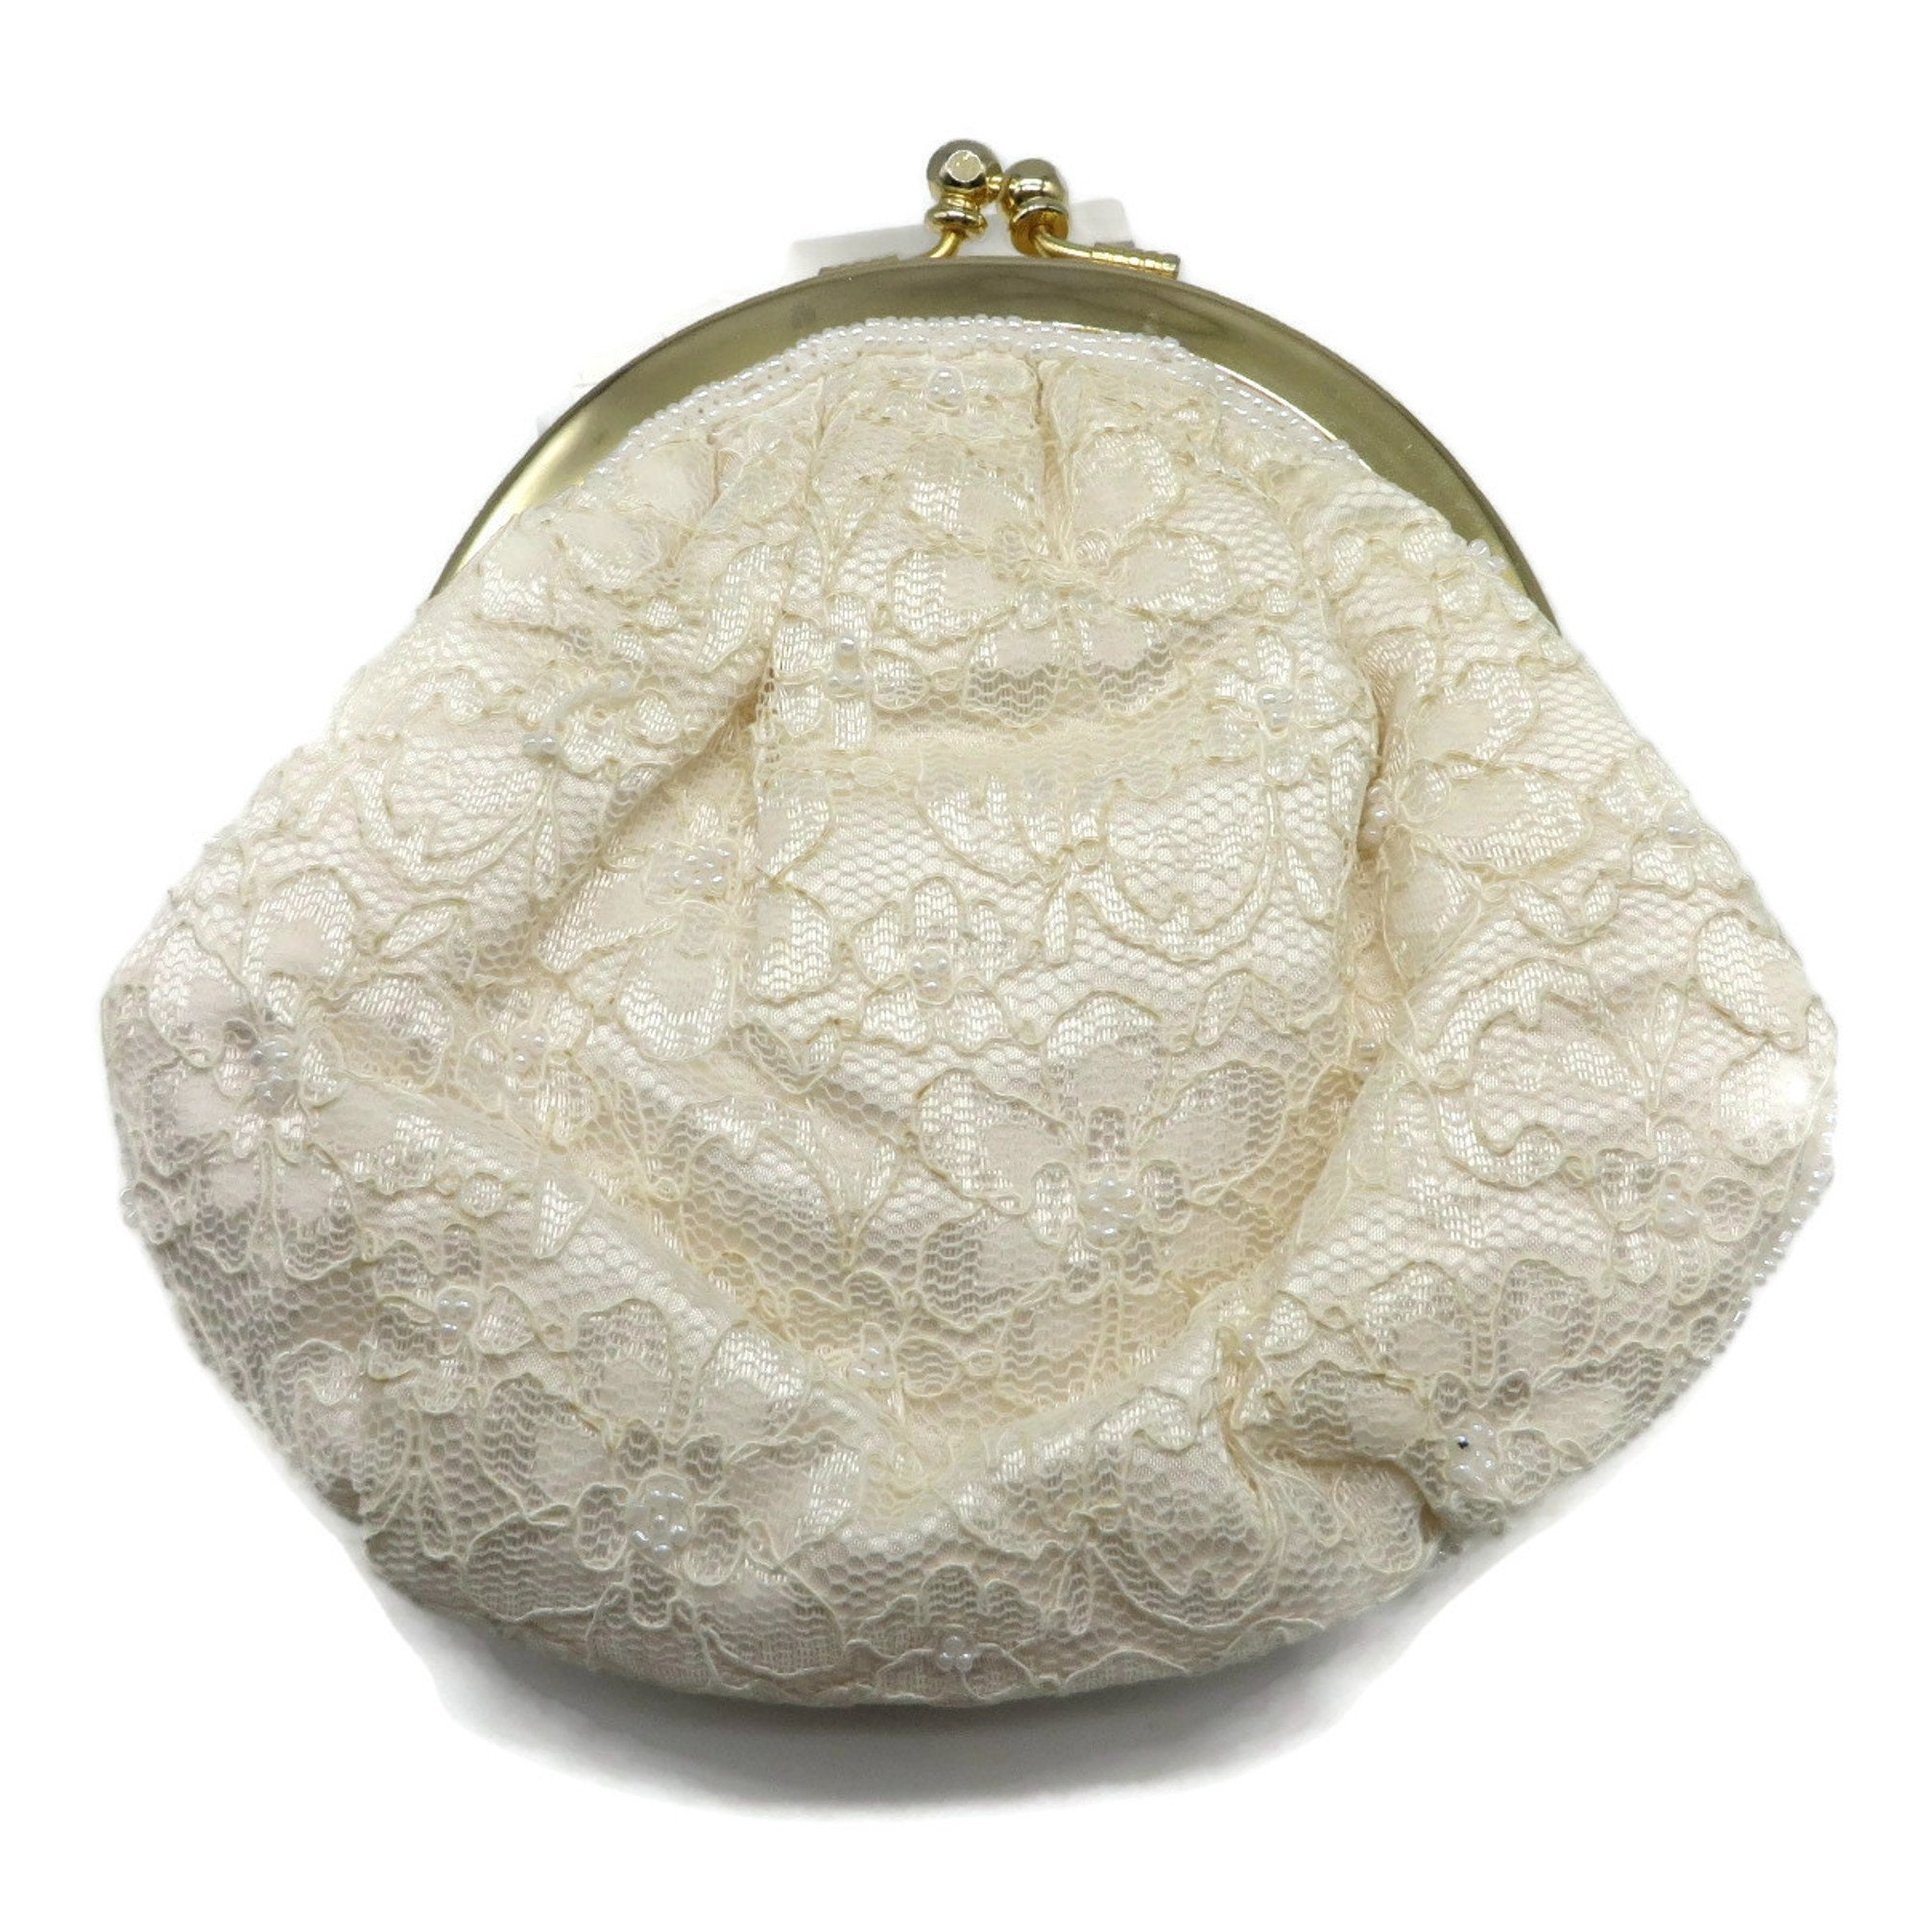 La Regale White Beaded Lace and Satin Evening Bag